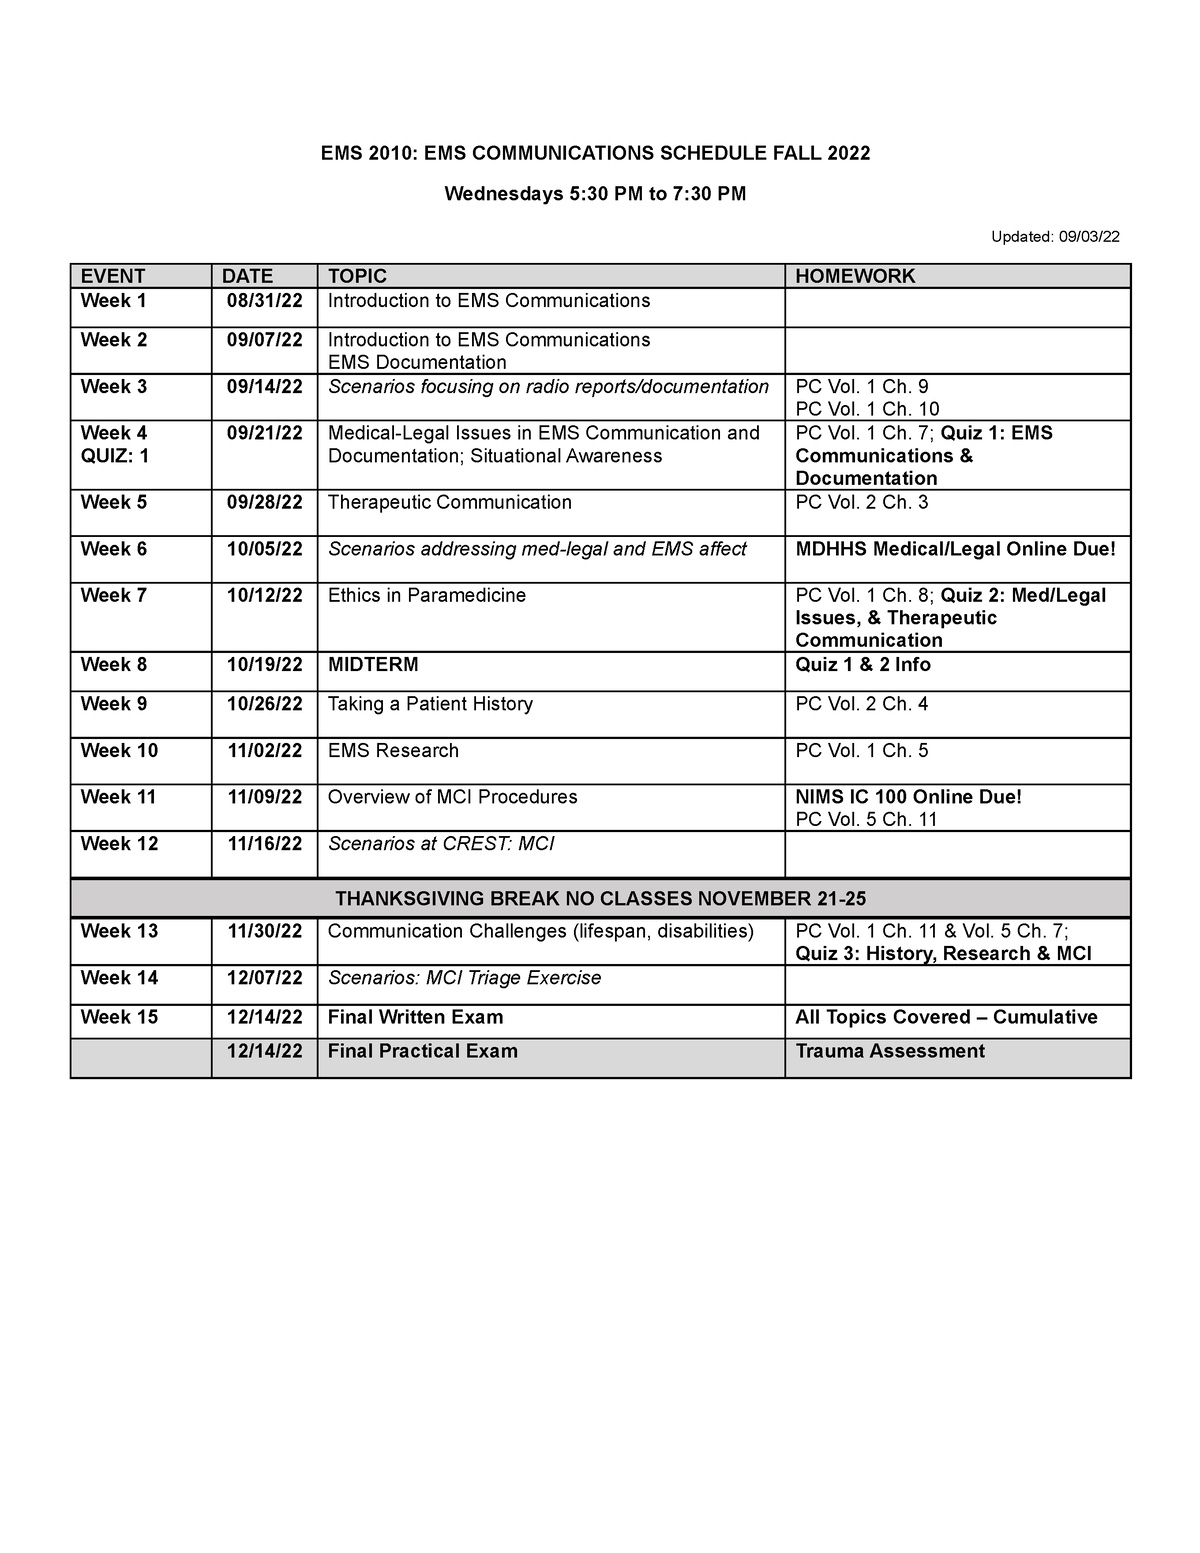 EMS2010 W Sched Fall 2022 EMS 2010 EMS COMMUNICATIONS SCHEDULE FALL